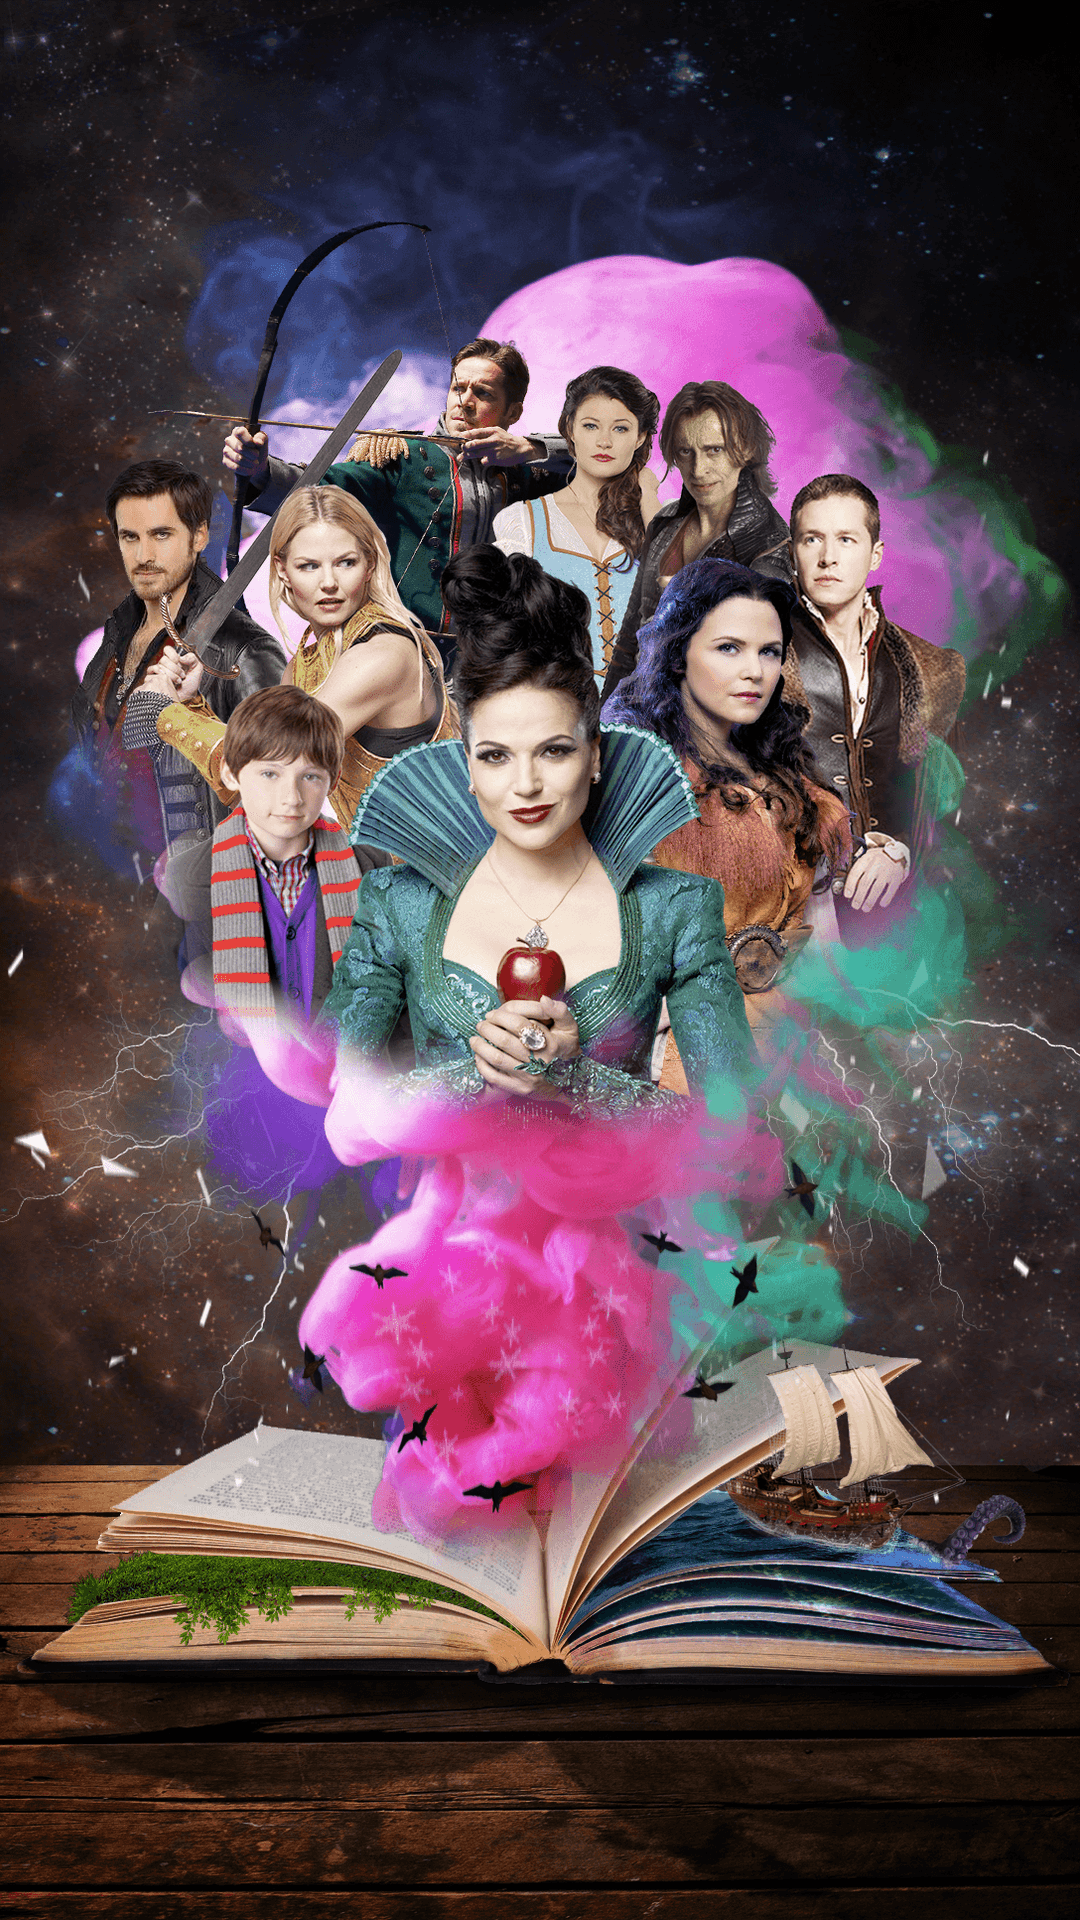 Follow the magical journeys of Emma Swan, Snow White and Prince Charming through Storybrooke and beyond!